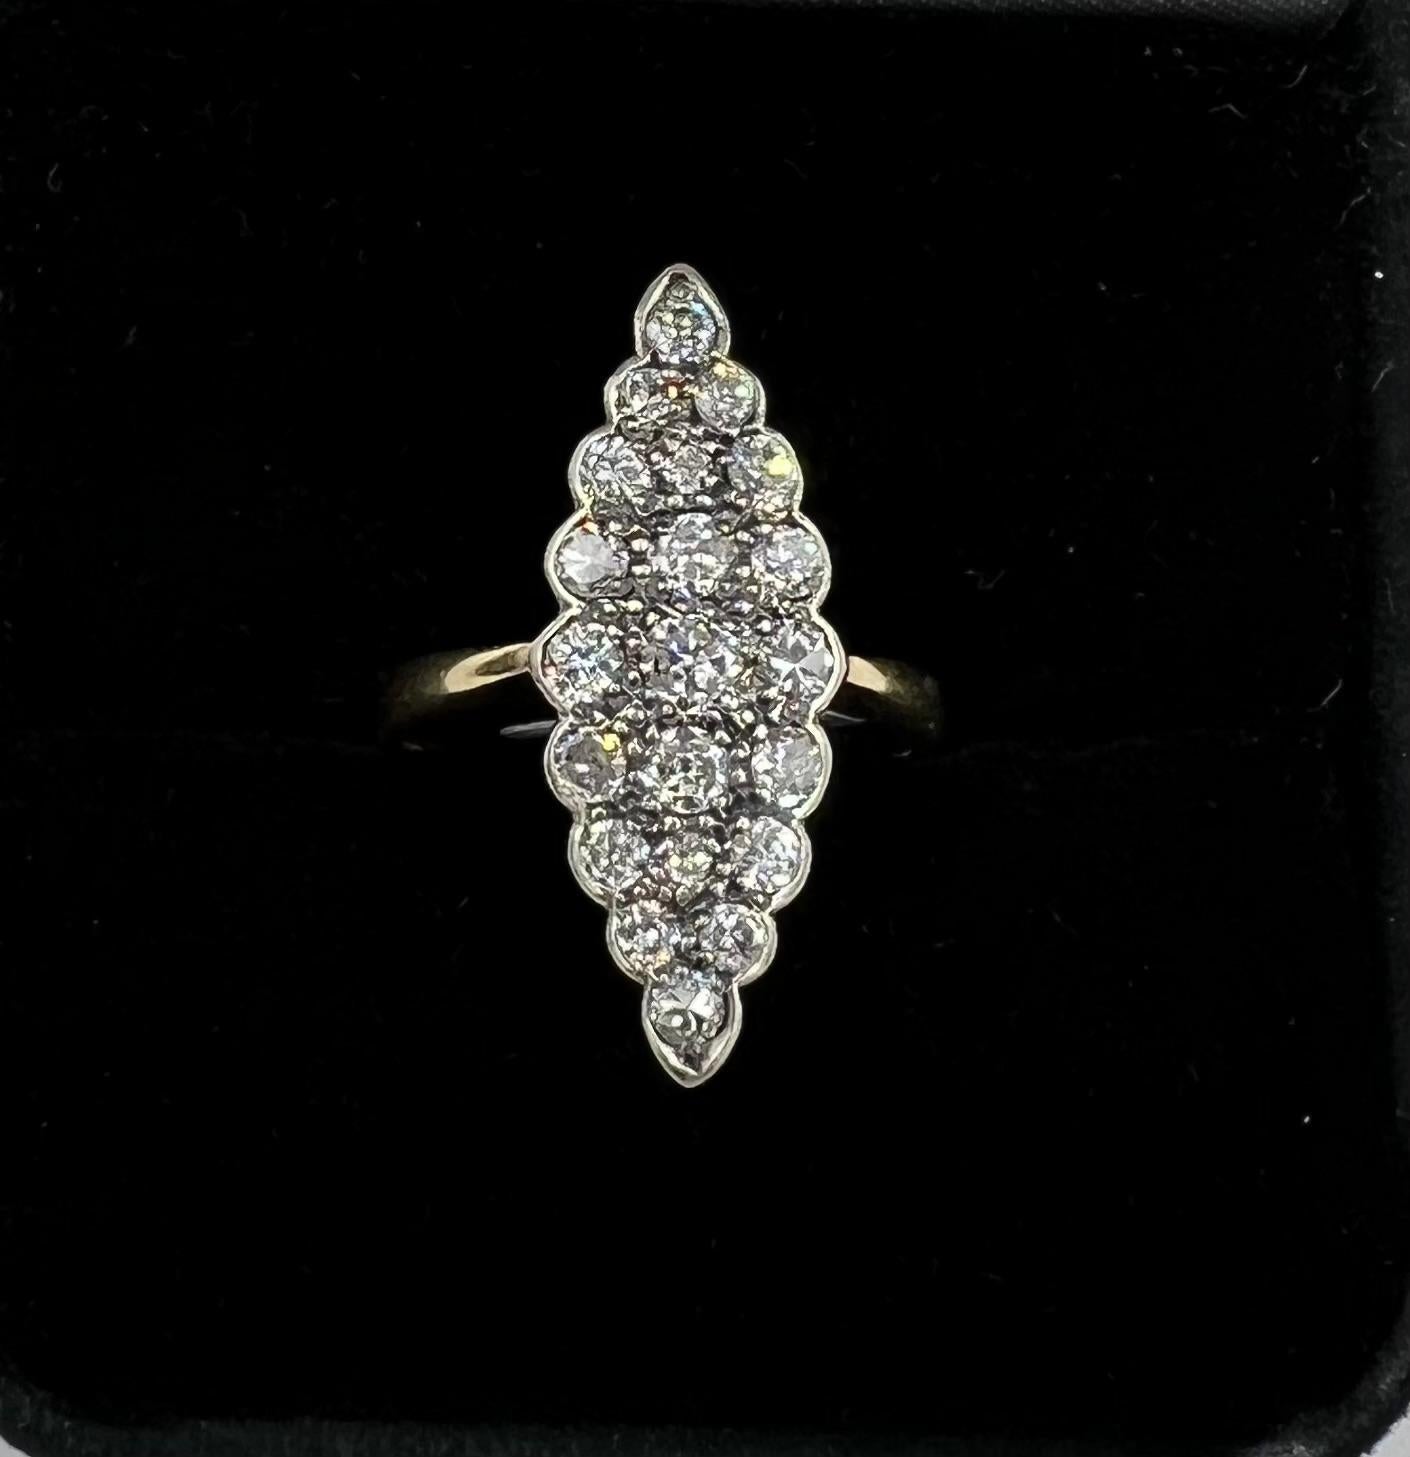 Vintage Navette Diamond Cluster Ring, circa 1930.
 This Vintage Navette Diamond Cluster Ring is a timeless piece of jewelry that exudes elegance and sophistication. With its intricate design and sparkling diamonds, this ring is sure to make a